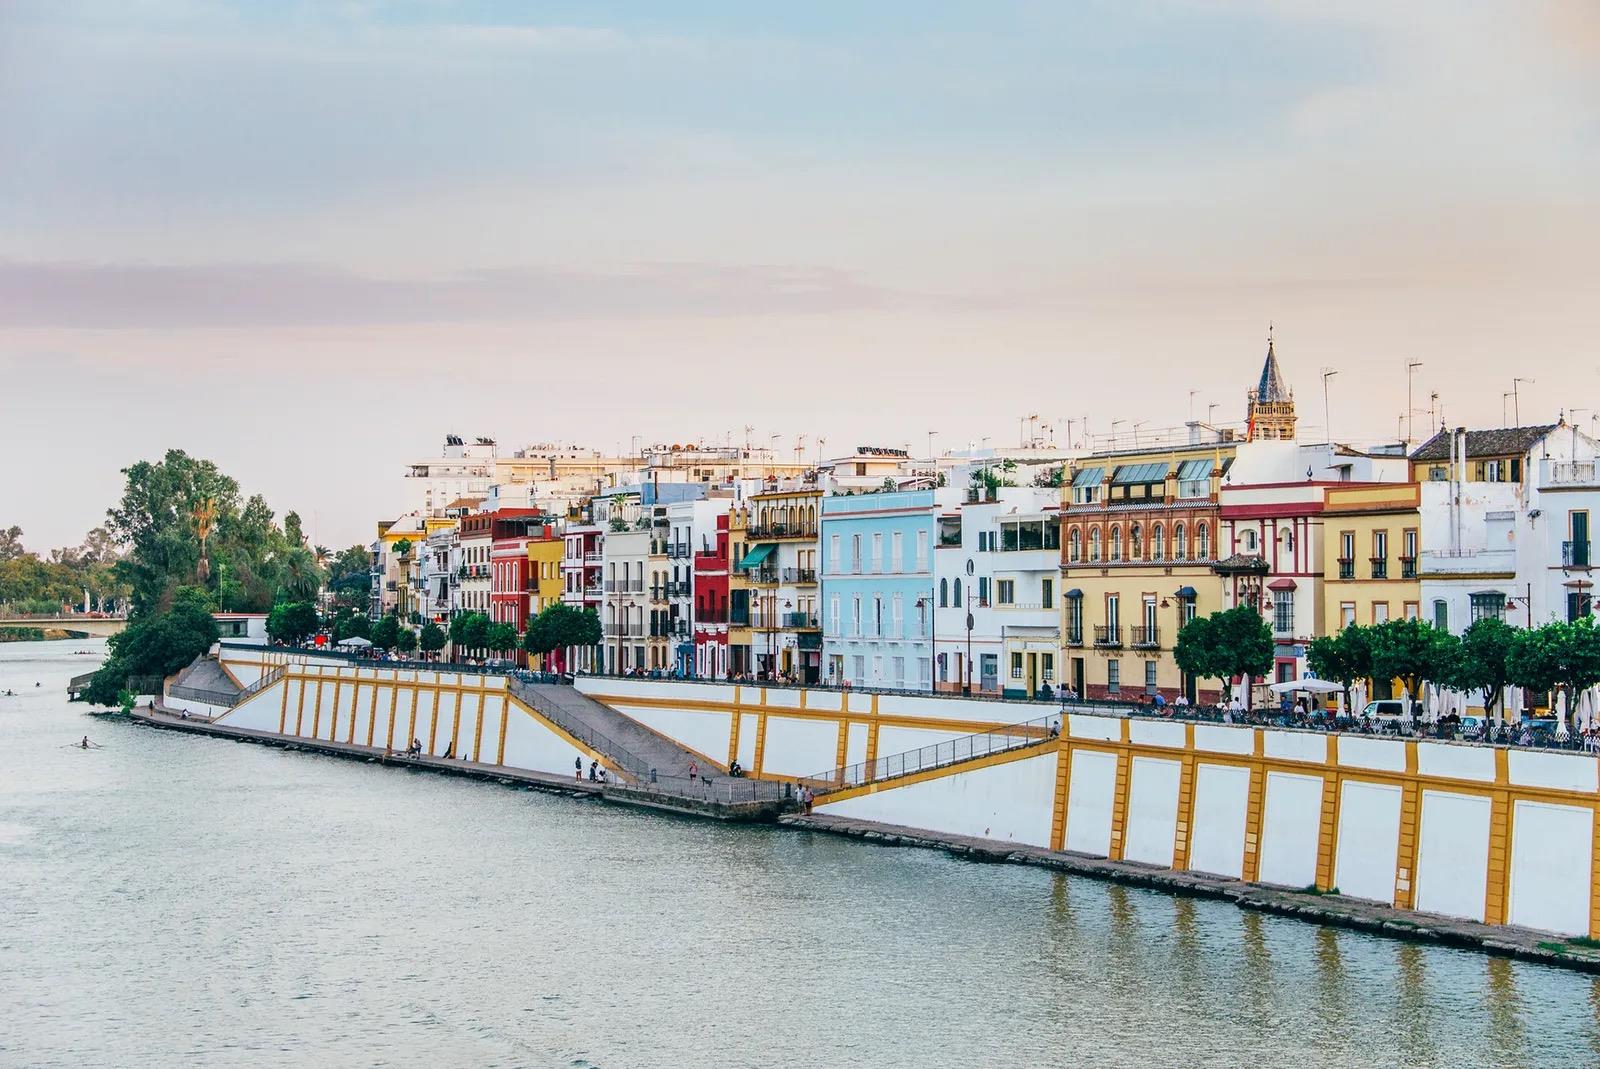 The Spell of Triana Free Walking Tour